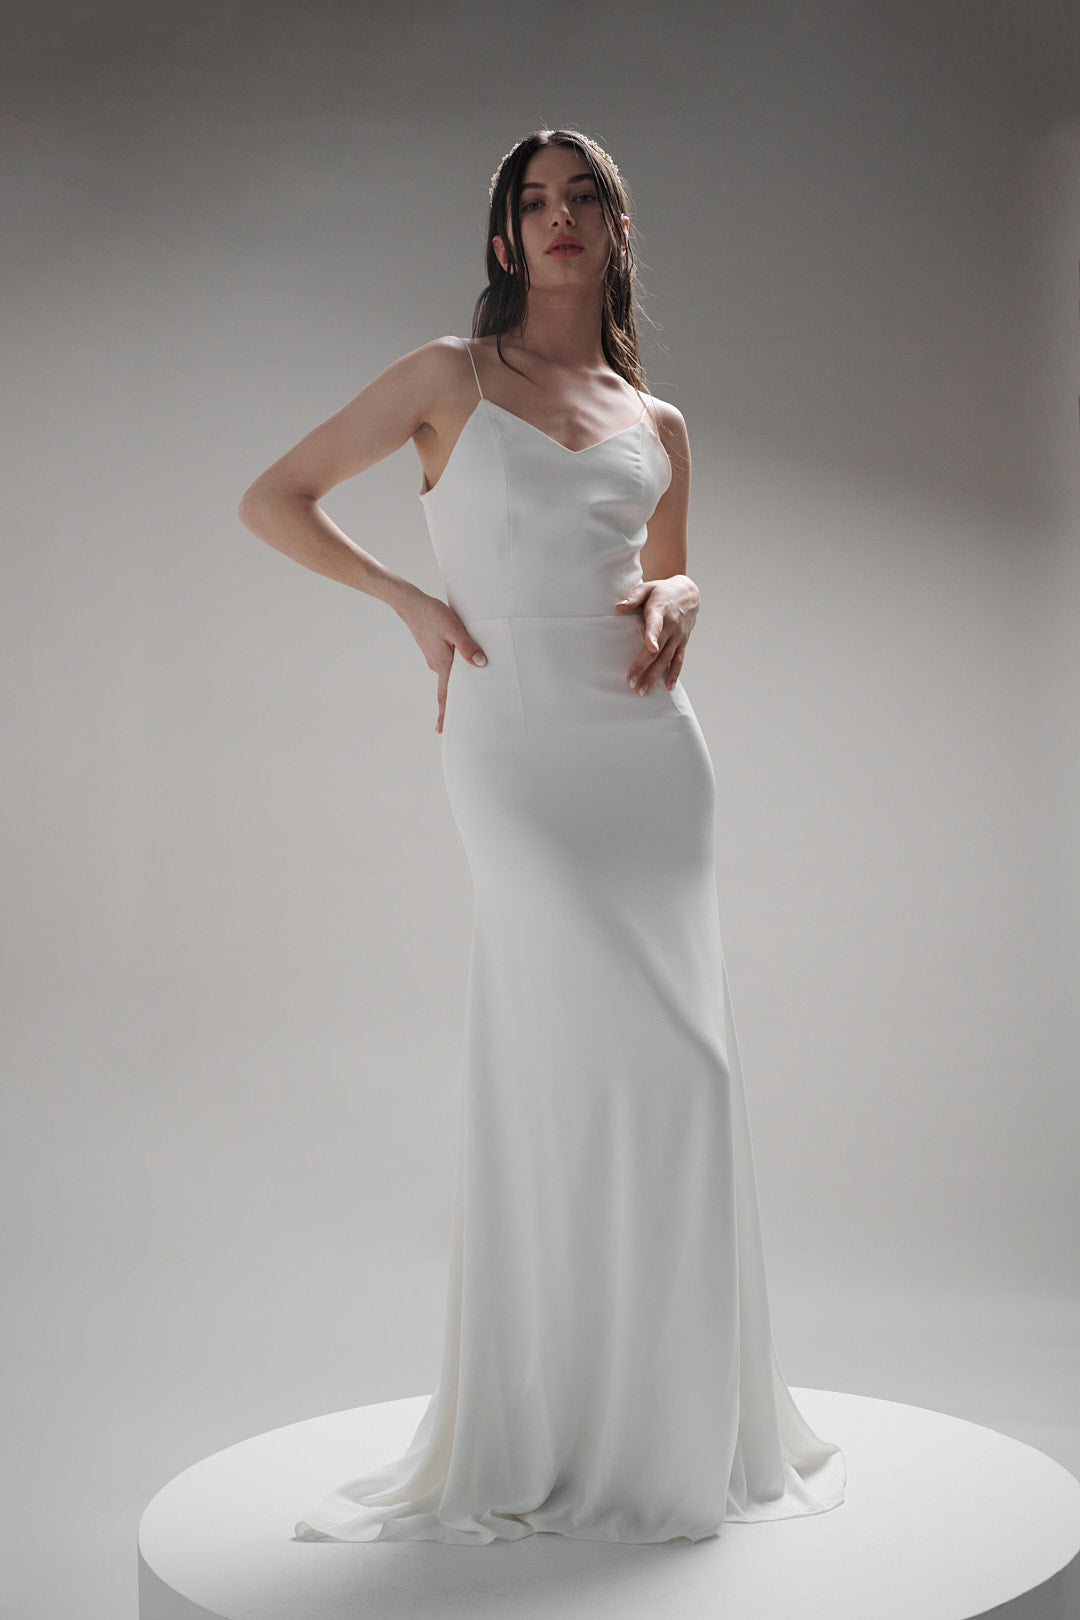 The Loire dress offers a timeless look of sophistication, perfect for a bride seeking an effortless yet elegant look.